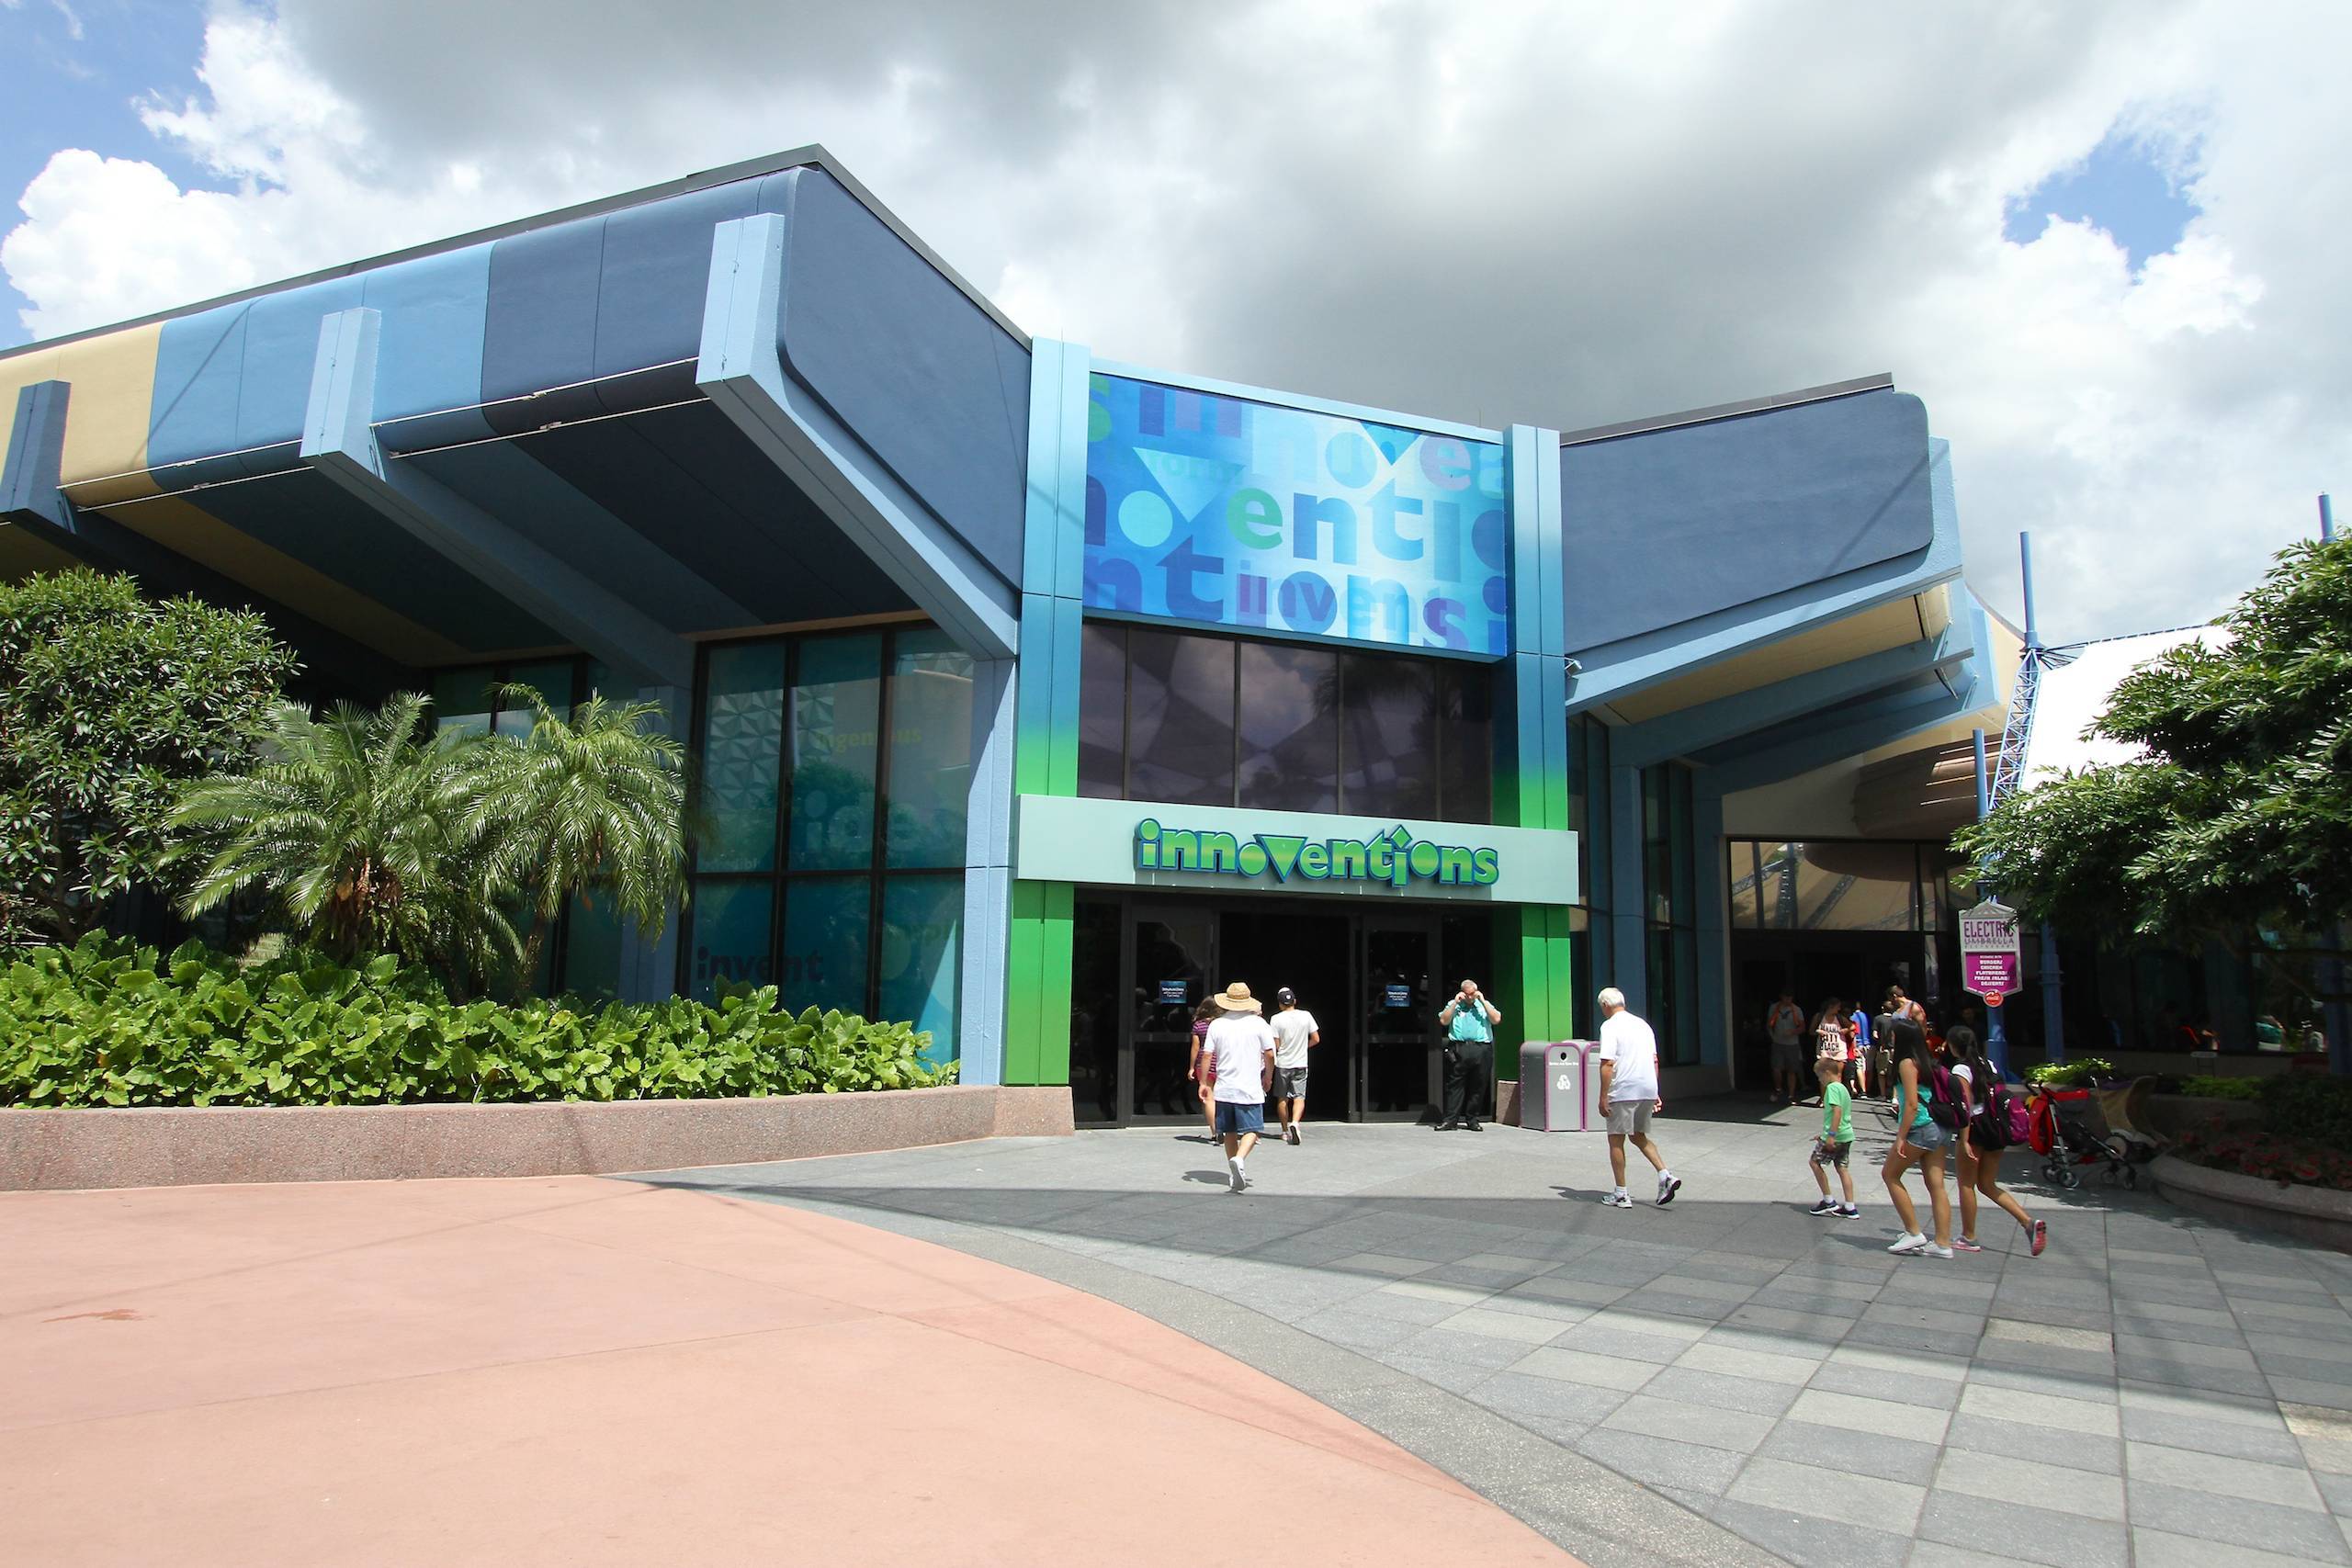 PHOTOS - Future World's new color scheme expands to more areas of the park